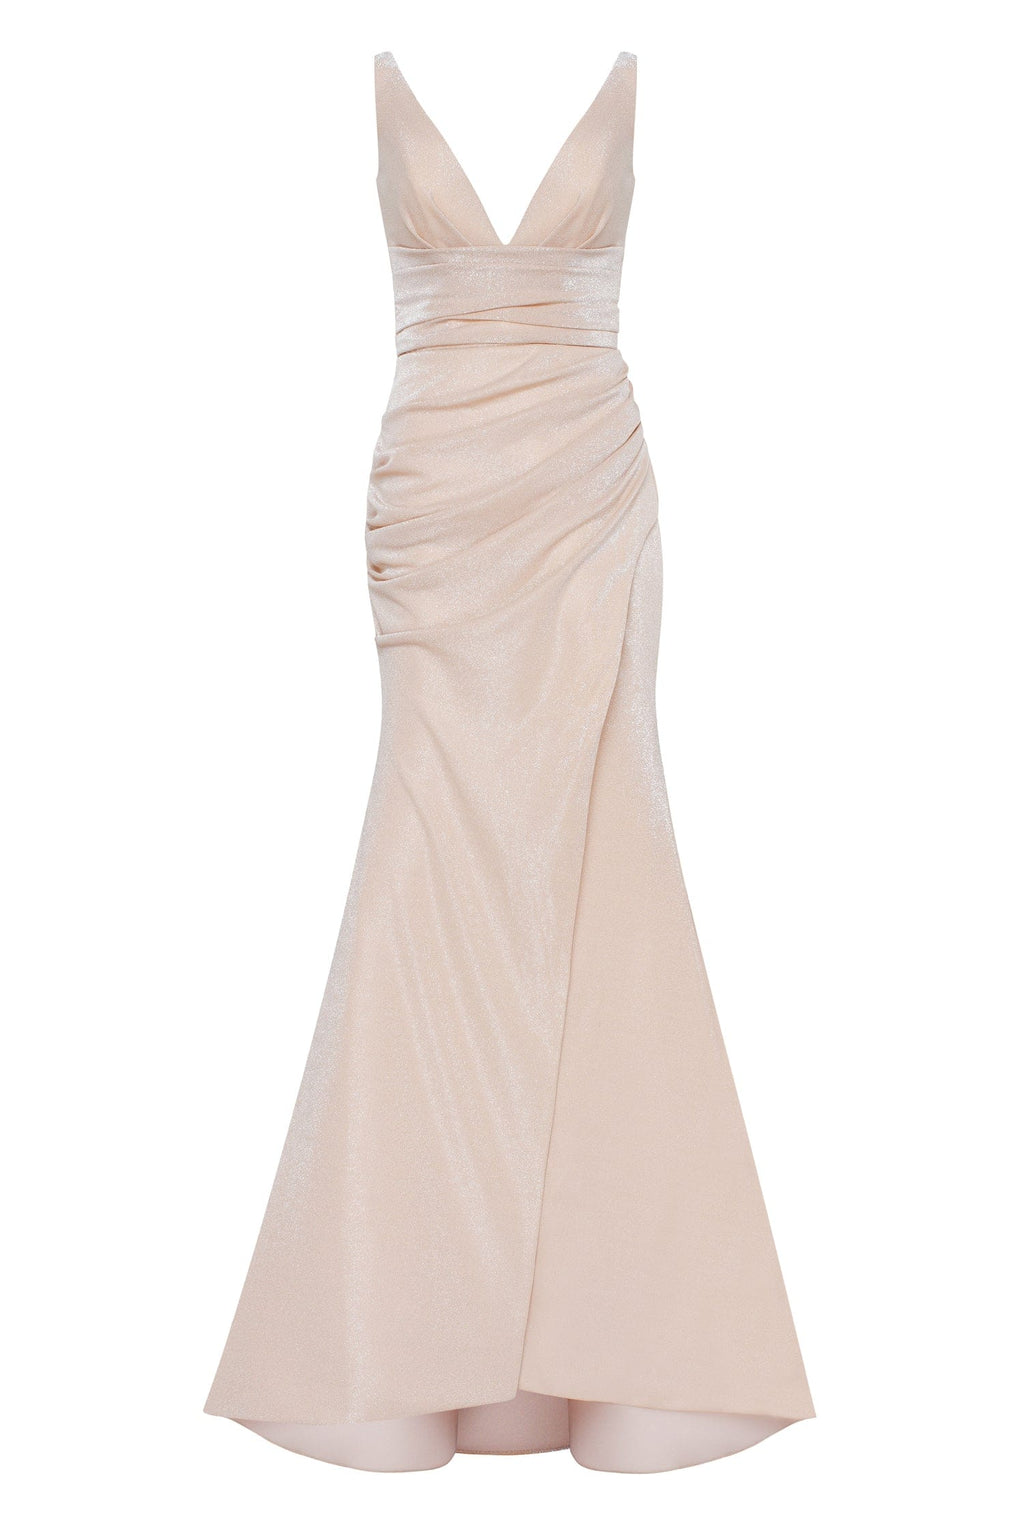 Shiny evening maxi dress on straps with a daring high slit - Milla